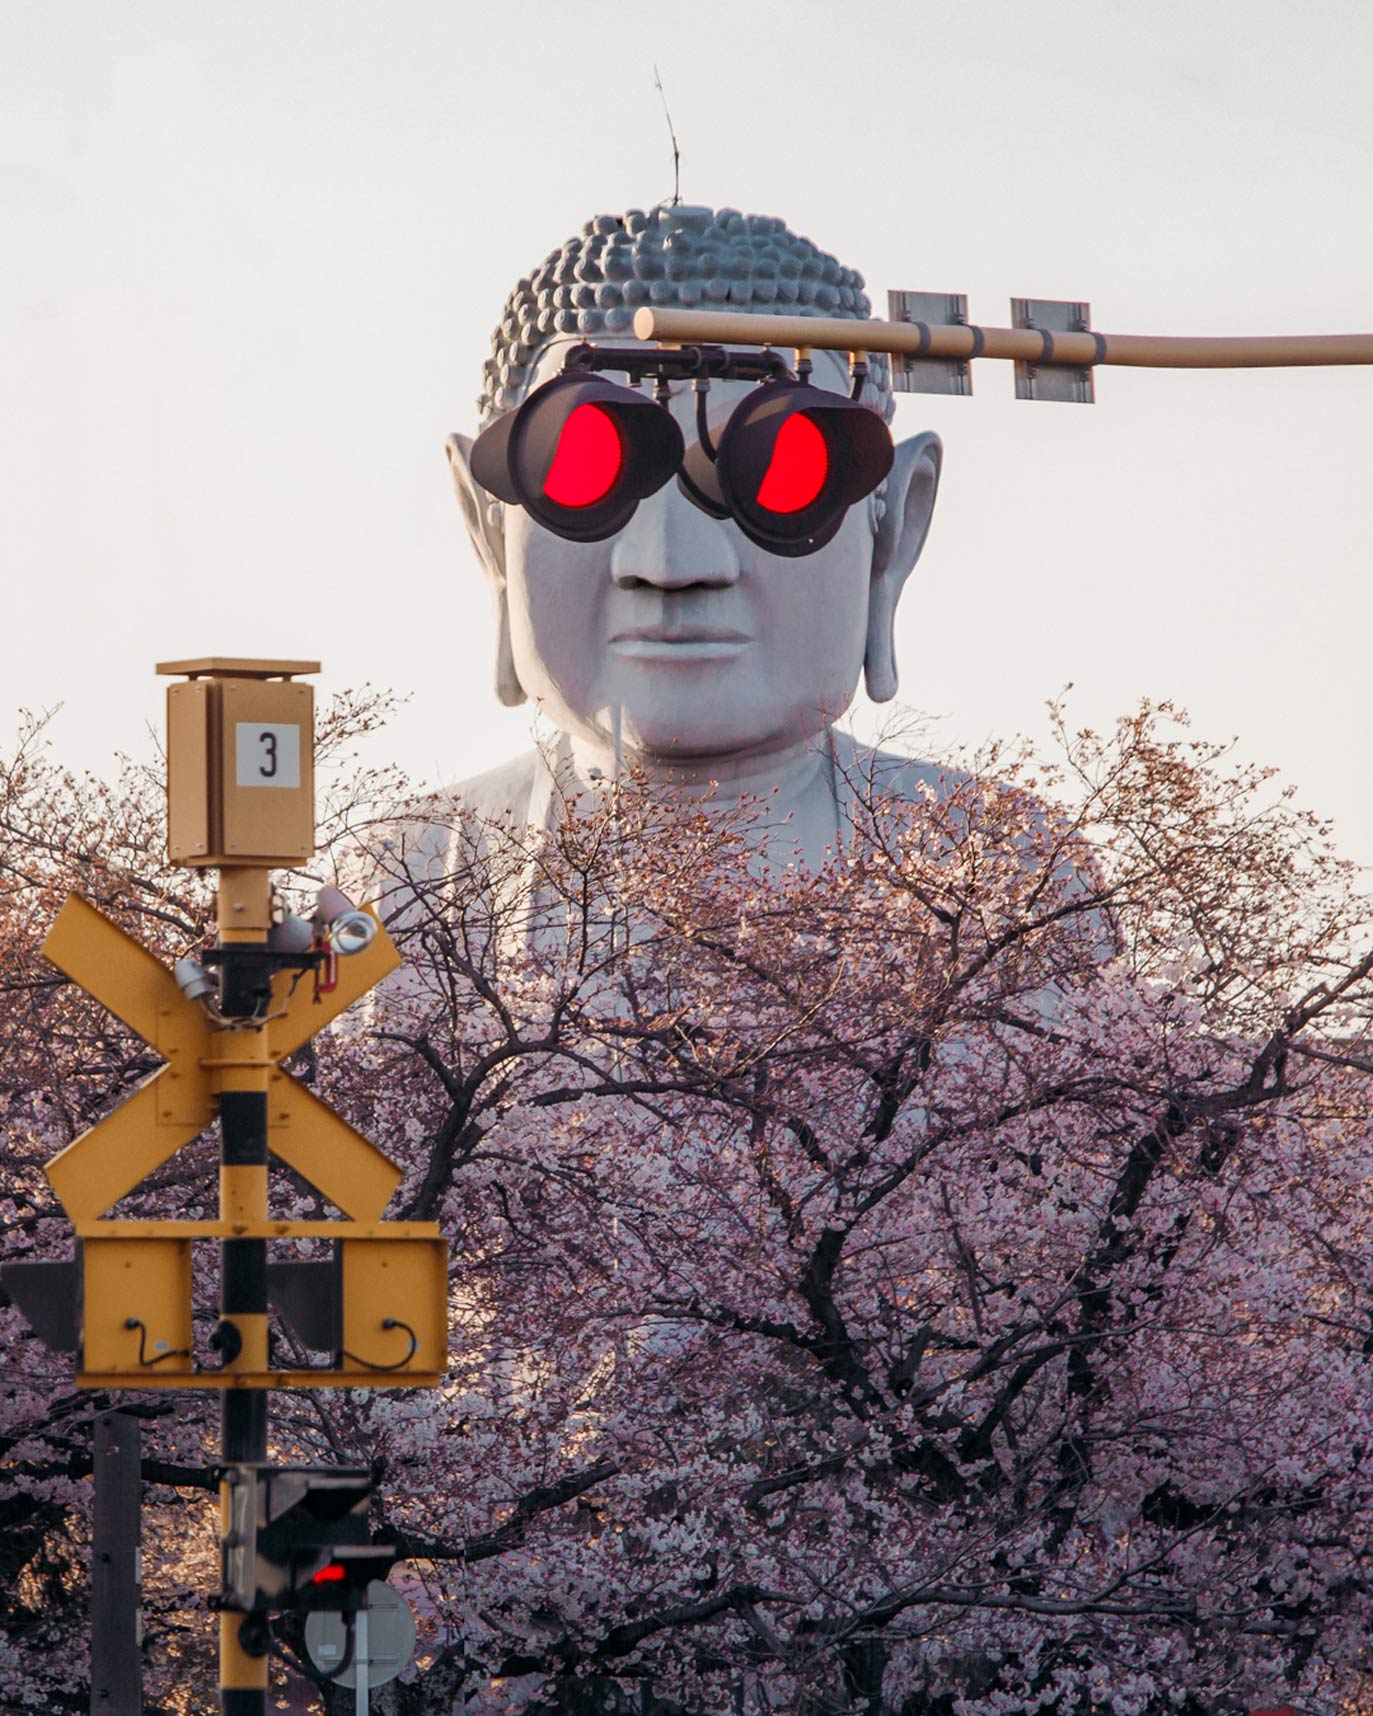 The Great Buddha at Hotei with Traffic Light Eyes